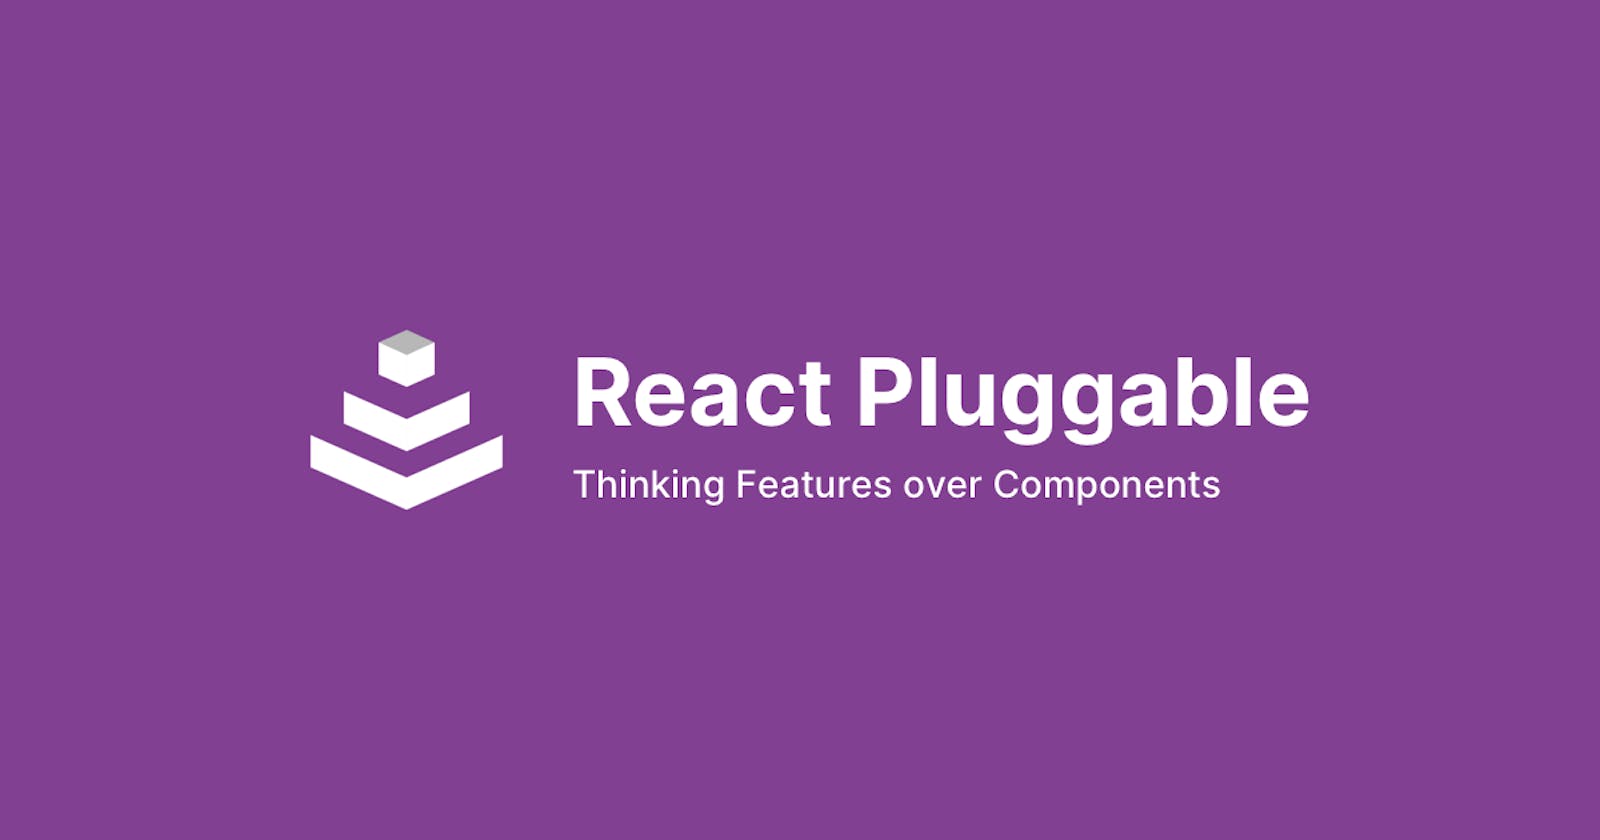 React Pluggable: Thinking Features over Components